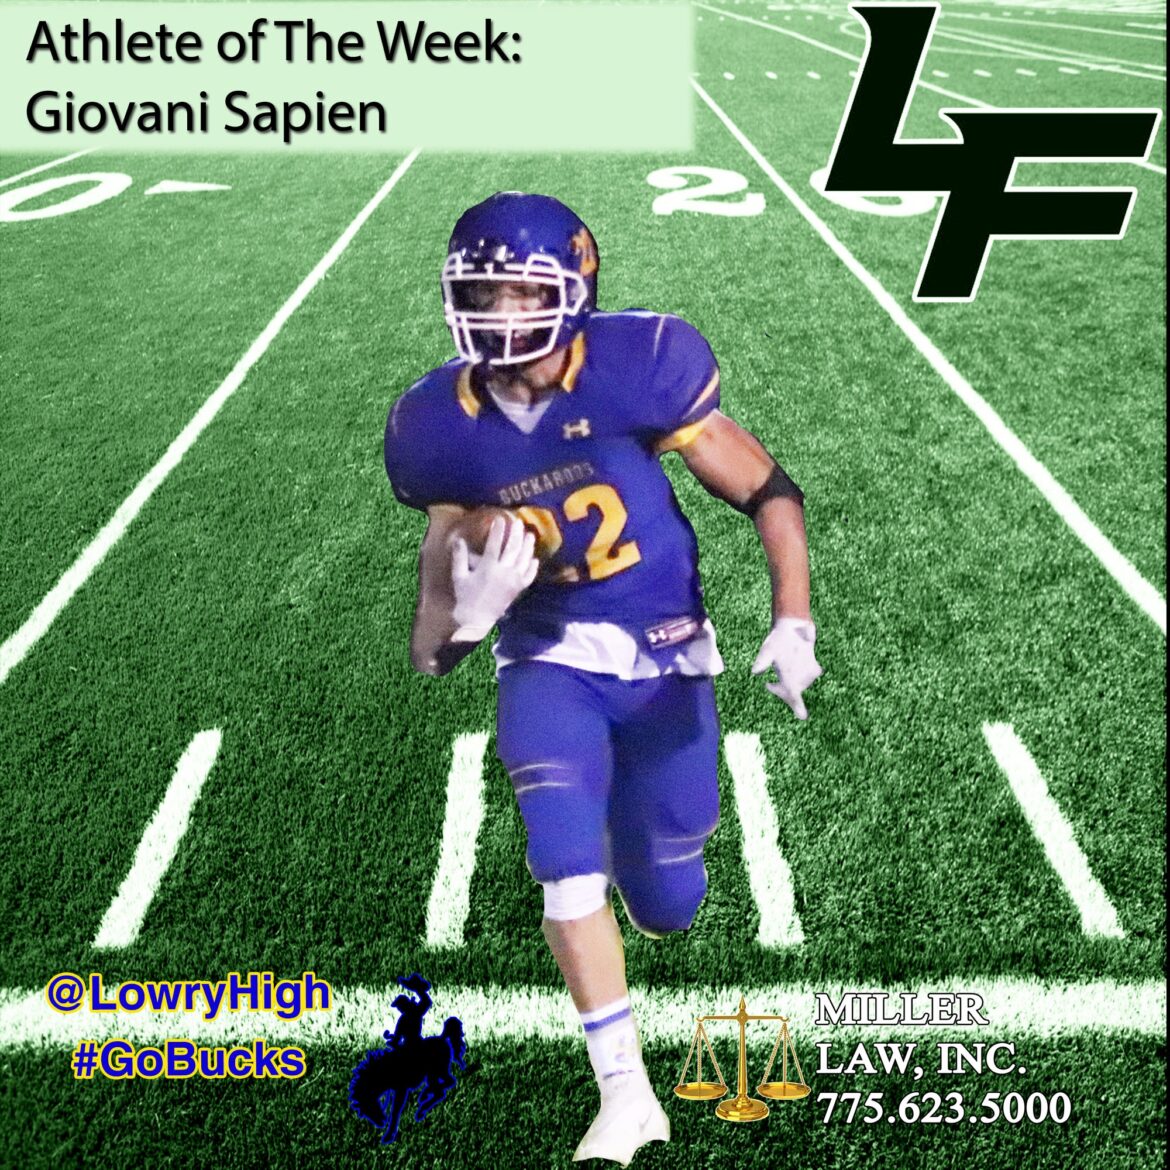 Giovani Sapien selected as Athlete of the Week